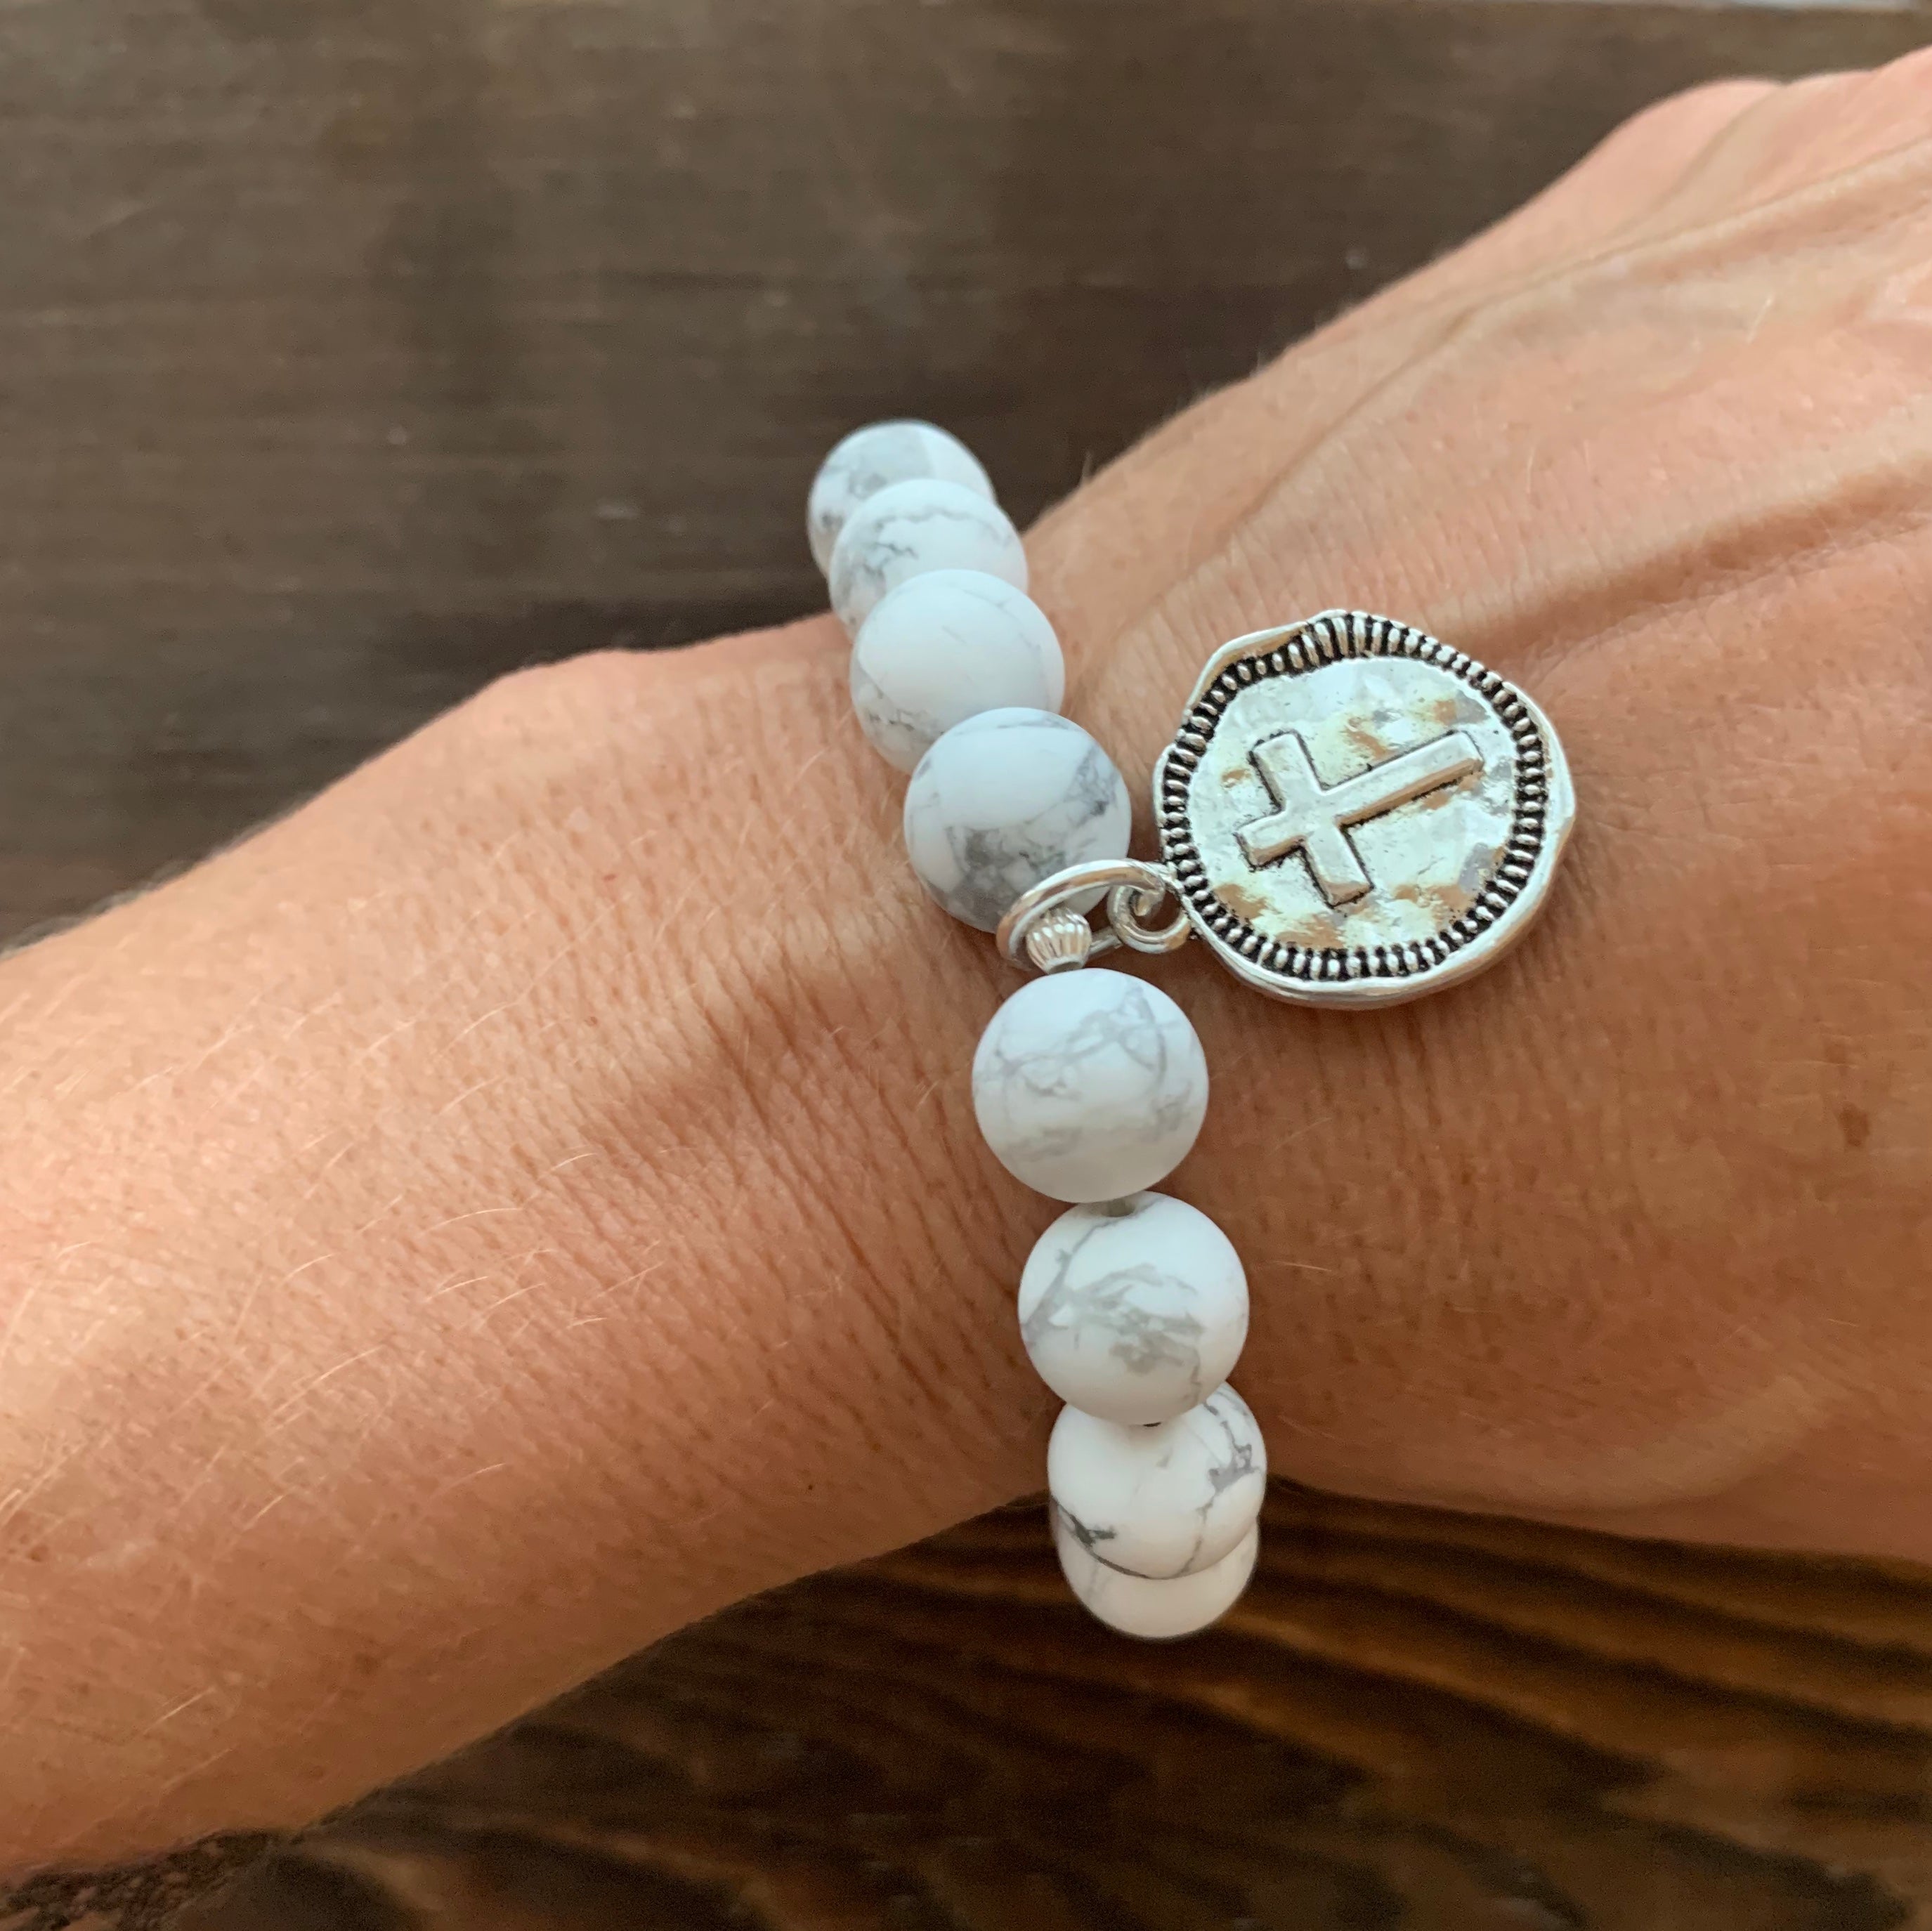 Heavenly Howlite Bracelet with Sterling Silver bead and Stamped Cross Charm